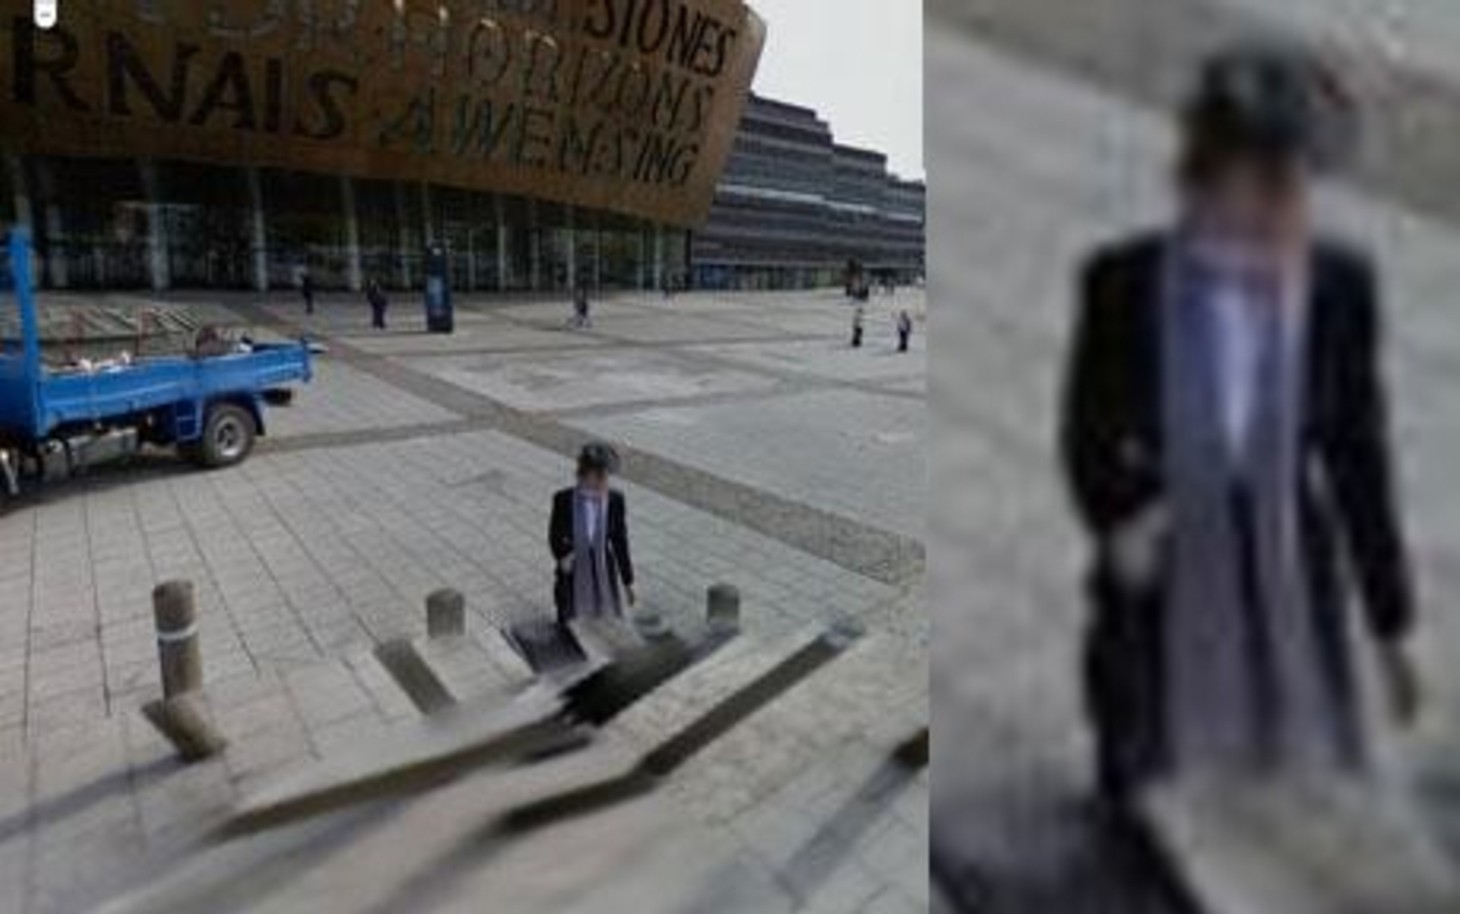 Did a Victorian woman appear at the Wales Millennium Centre?   A short walk from Future Inn Cardiff is the Wales Millennium Centre. Even though the area has now been revamped, the Cardiff Bay district has a dark and sinister past. It was once one of the busiest ports in the world, and there has been countless murders, riots and violence.    In 2009, Google footage needed to be examined as it appeared that a woman dressed in what seemed to be Victorian looking clothing appeared to be gliding above the pavement. She wore a long skirt and blouse, bow tie, hat and scarf. Experts that have studied the image cannot account for her presence.